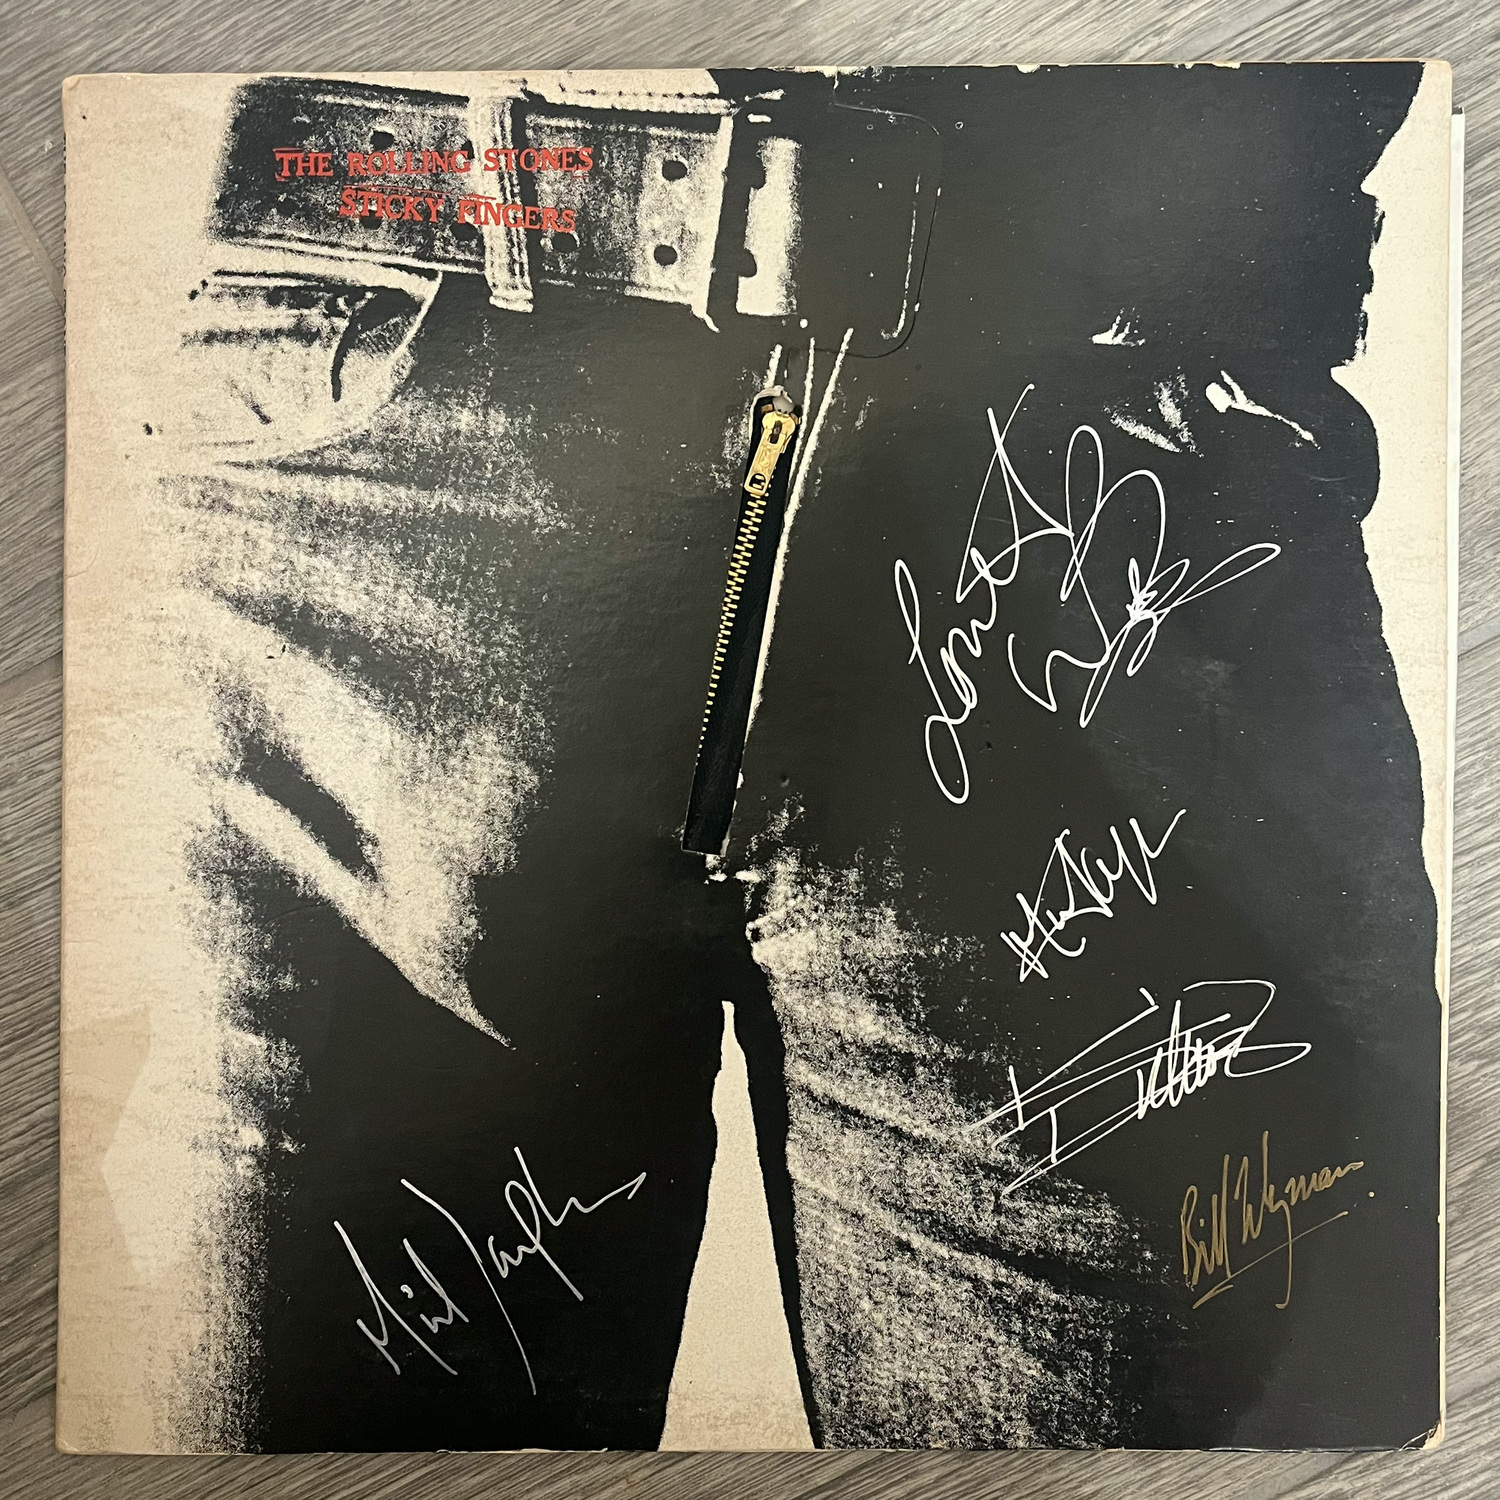 The Rolling Stones Sticky Fingers Original Album designed by Andy Warhol and Hand Signed by Band